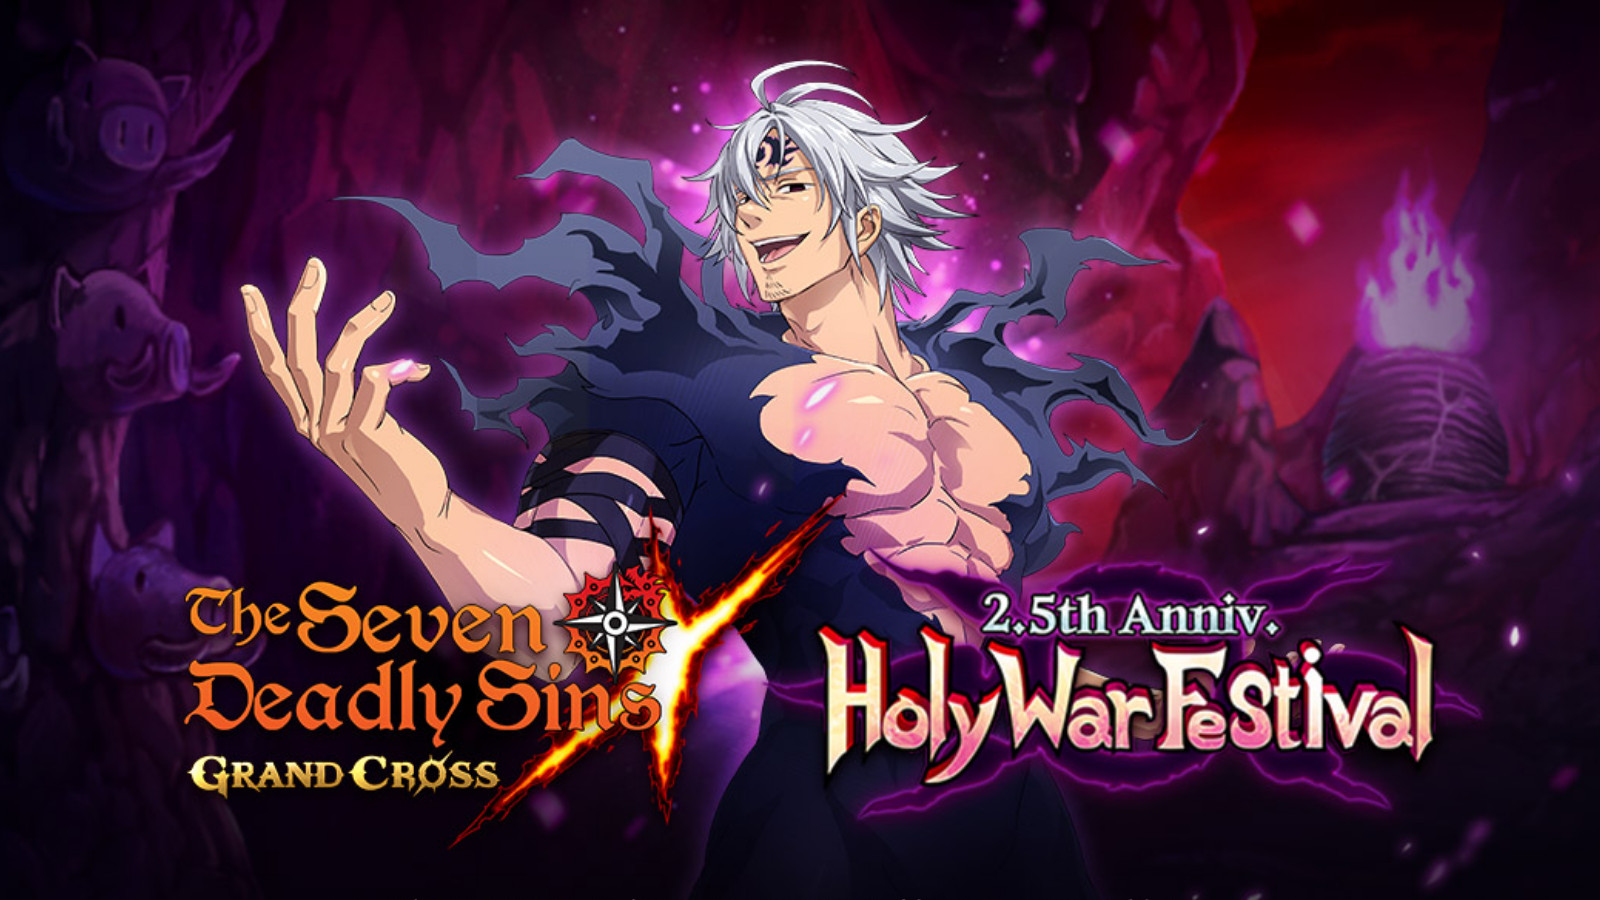 The Seven Deadly Sins is Celebrating the 2.5th Anniv. with Holy War Festival image